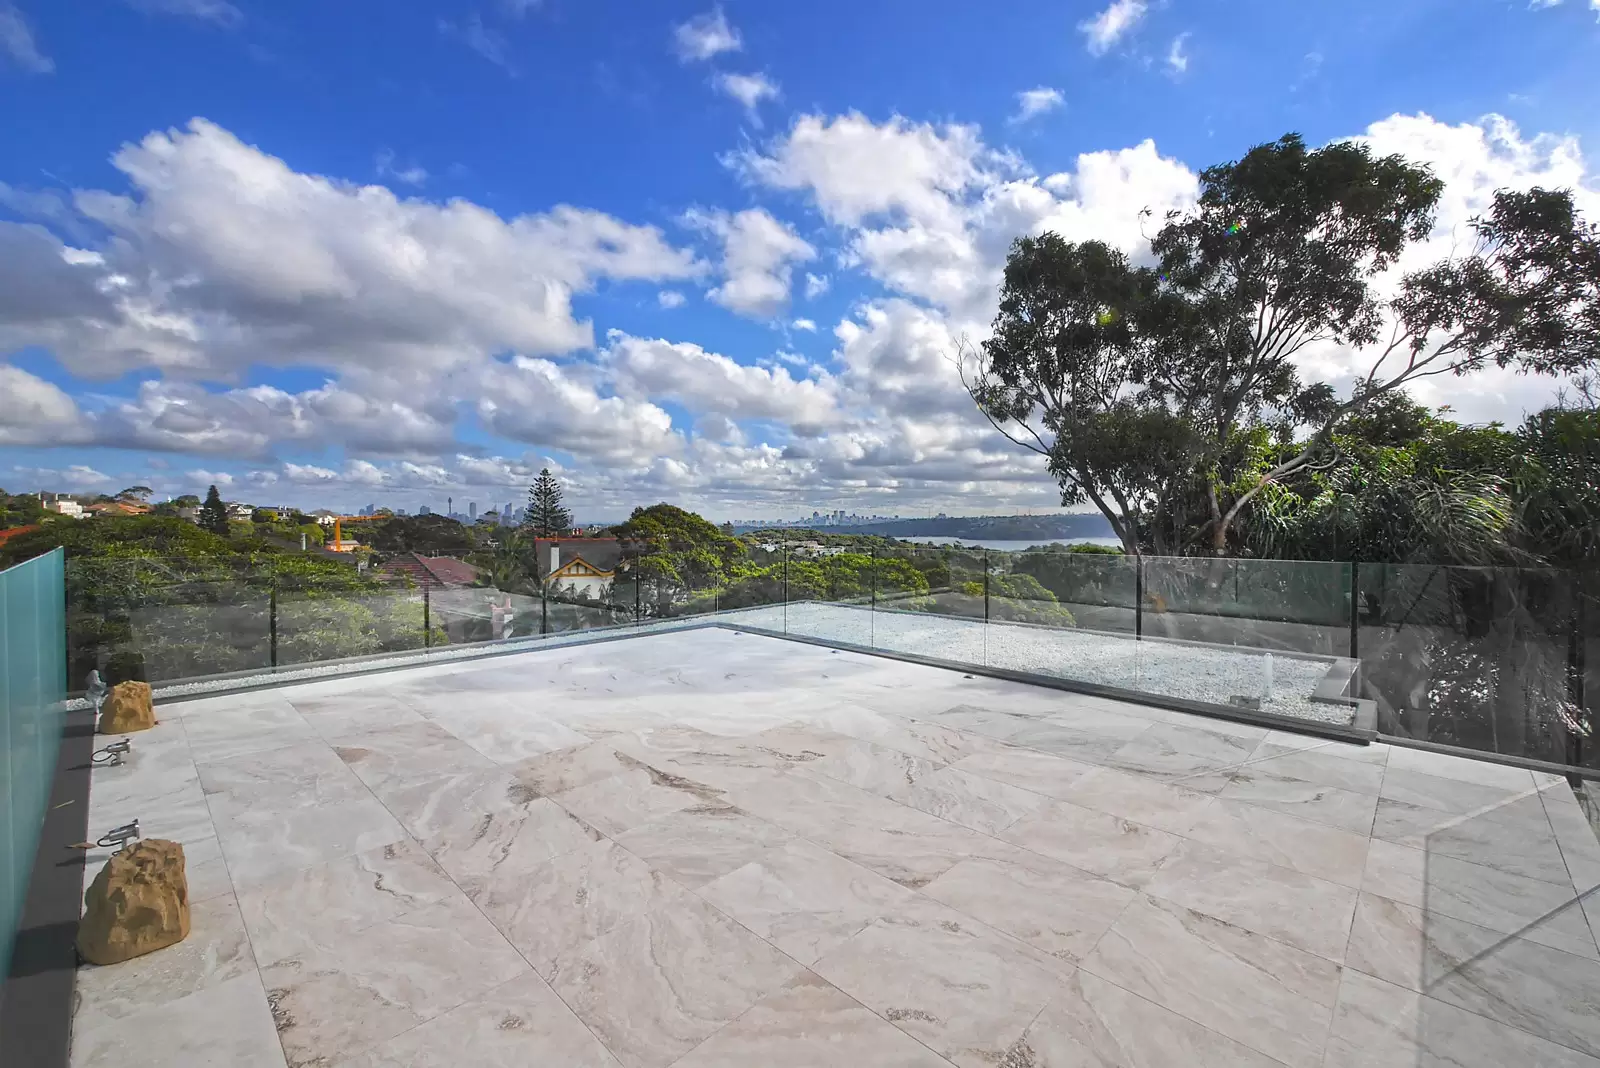 Photo #23: 23 Serpentine Parade, Vaucluse - Sold by Sydney Sotheby's International Realty